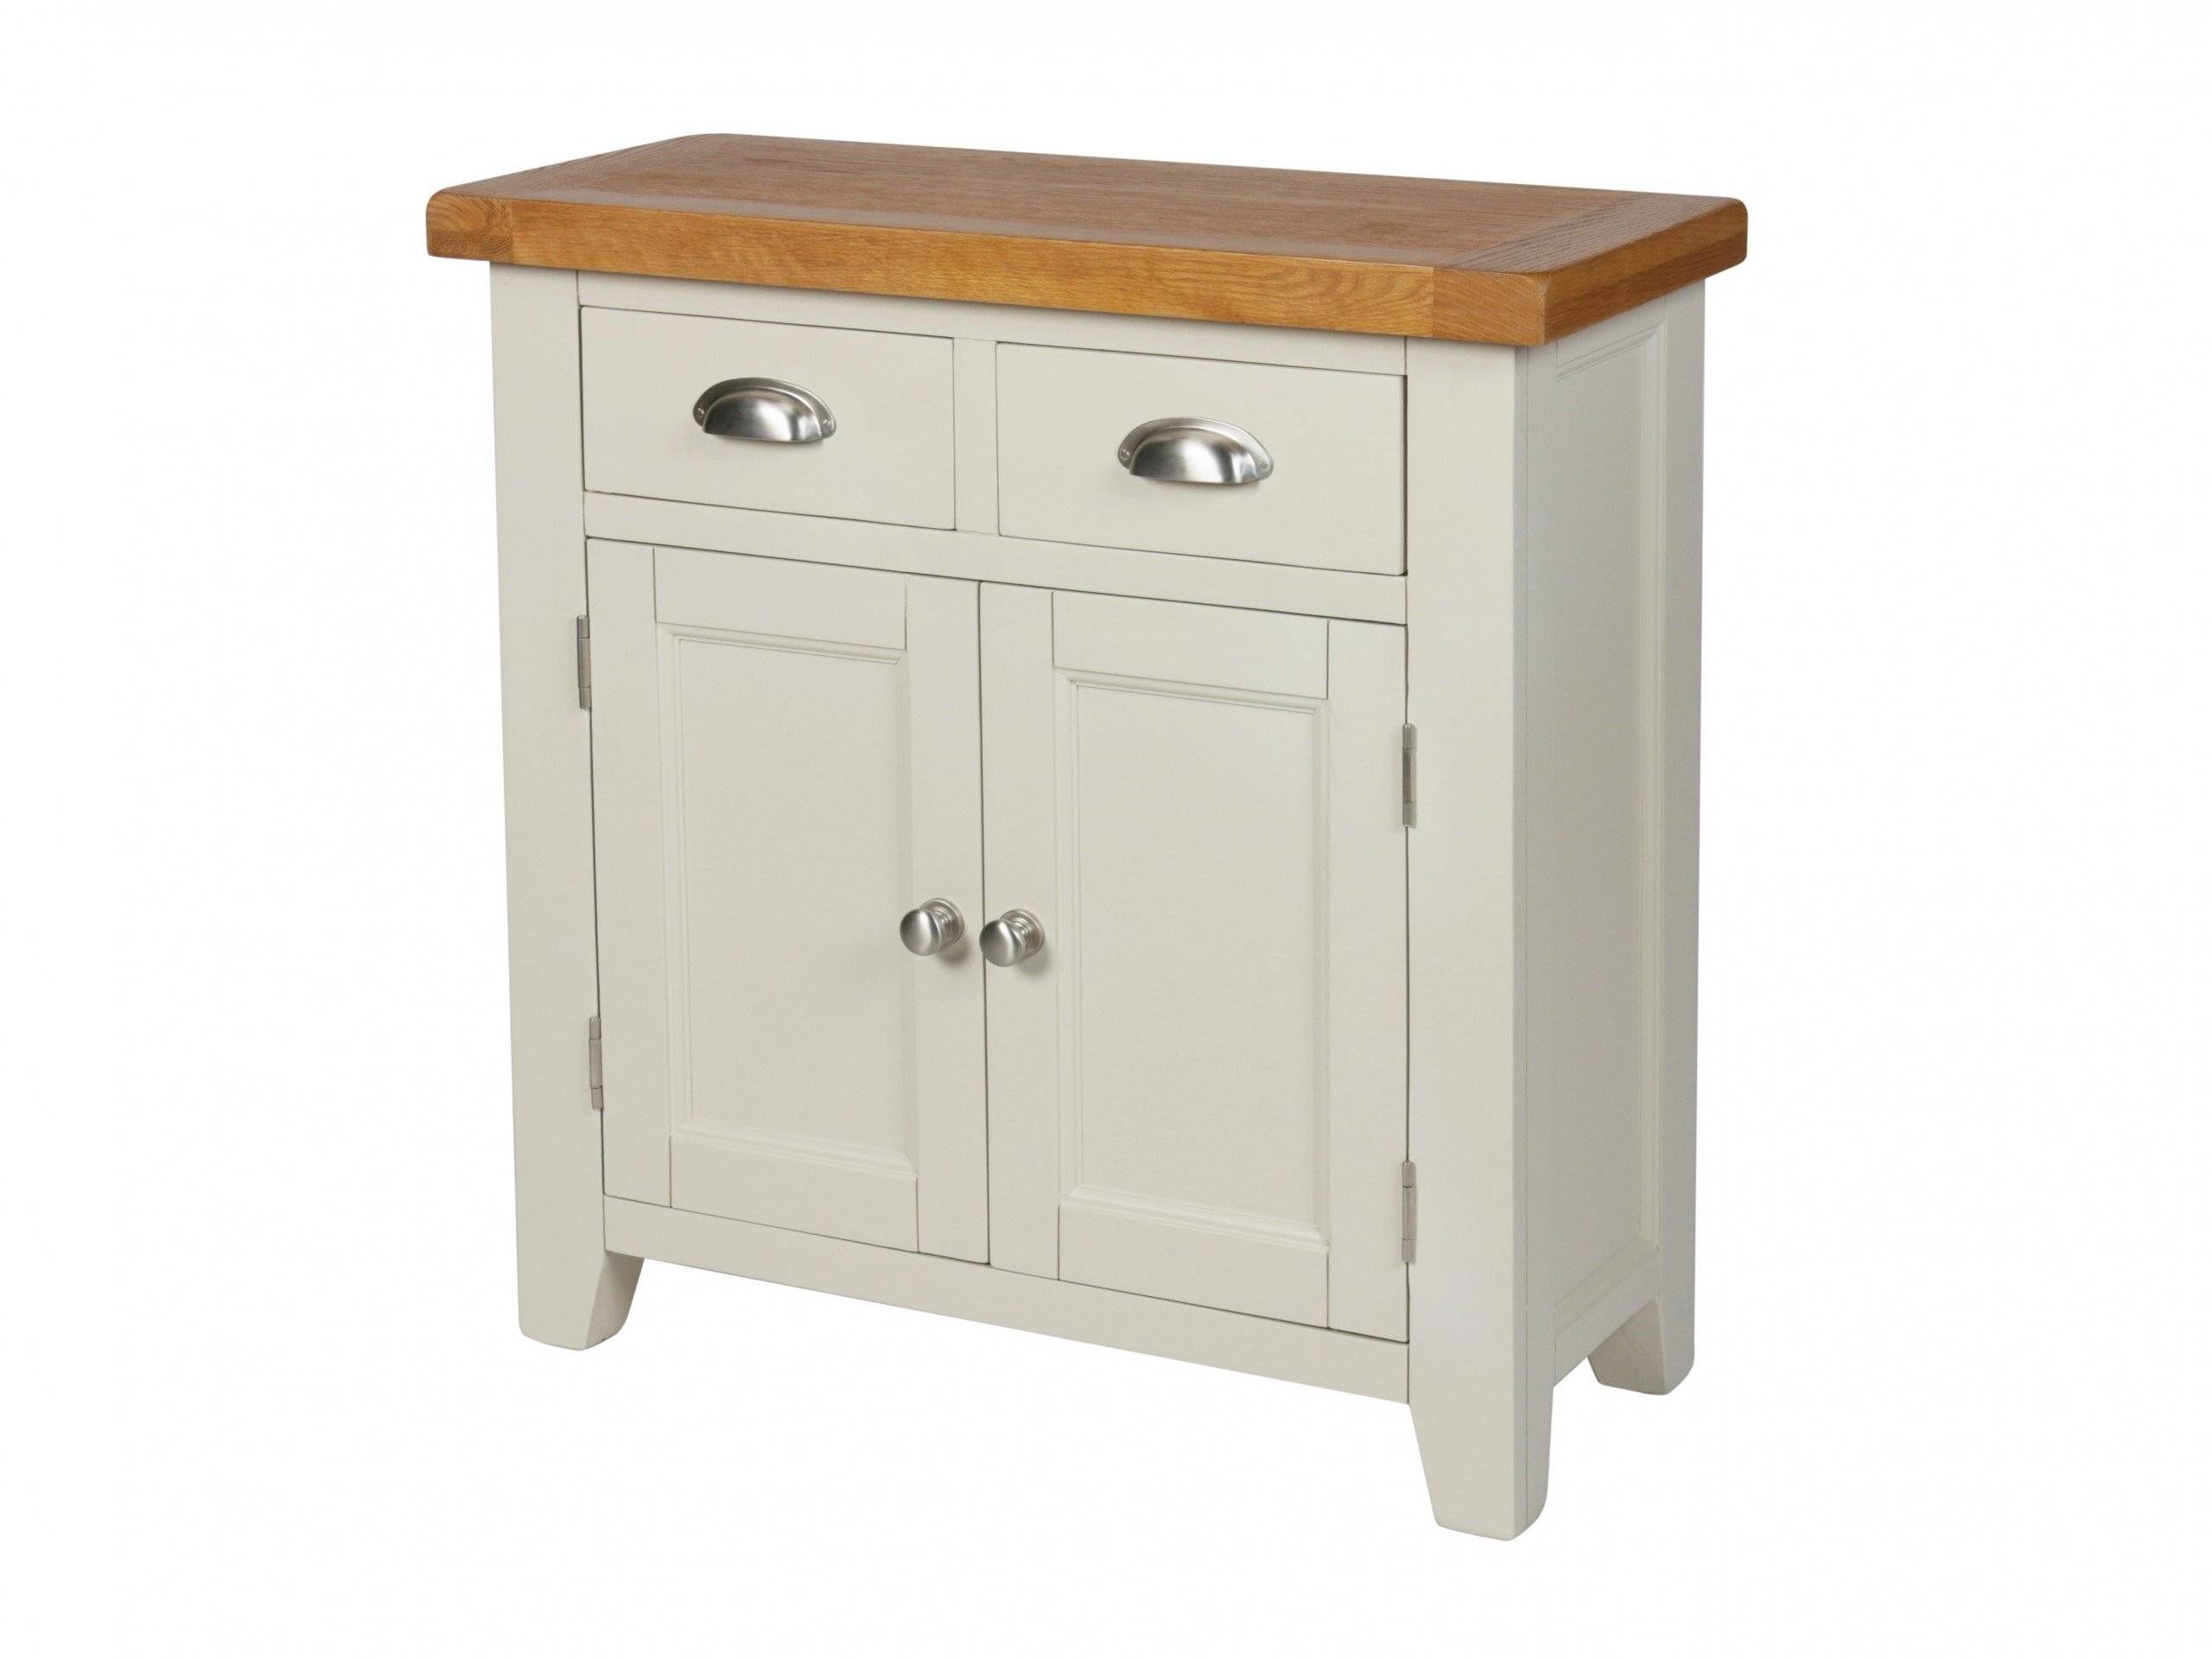 Buy Your Oak Sideboards To Match Our Dining Room Furniture Ranges With Regard To Small Sideboards (View 10 of 20)